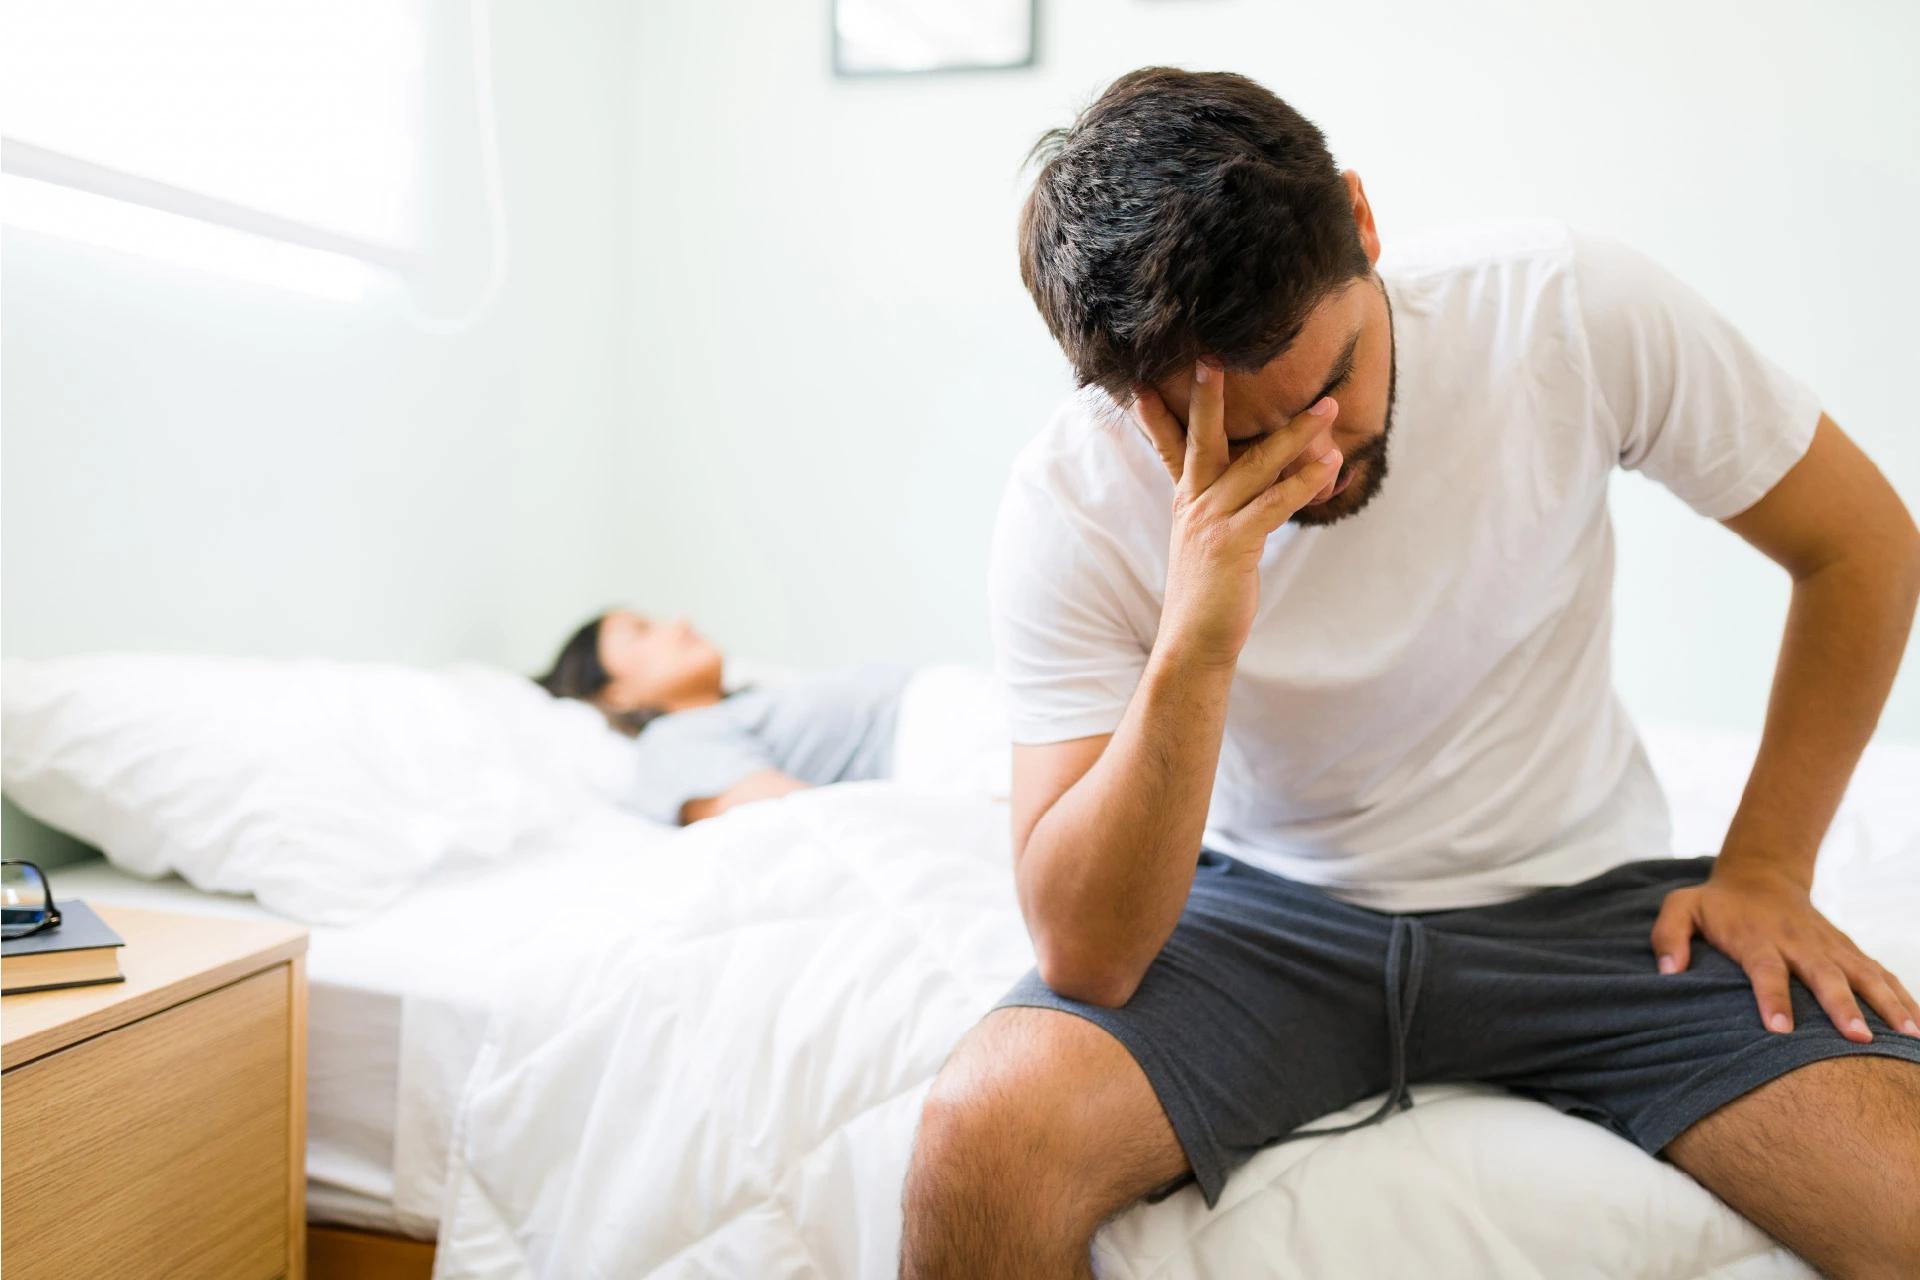 Erectile Dysfunction: What Are Its Main Causes, Symptoms, And Treatment?